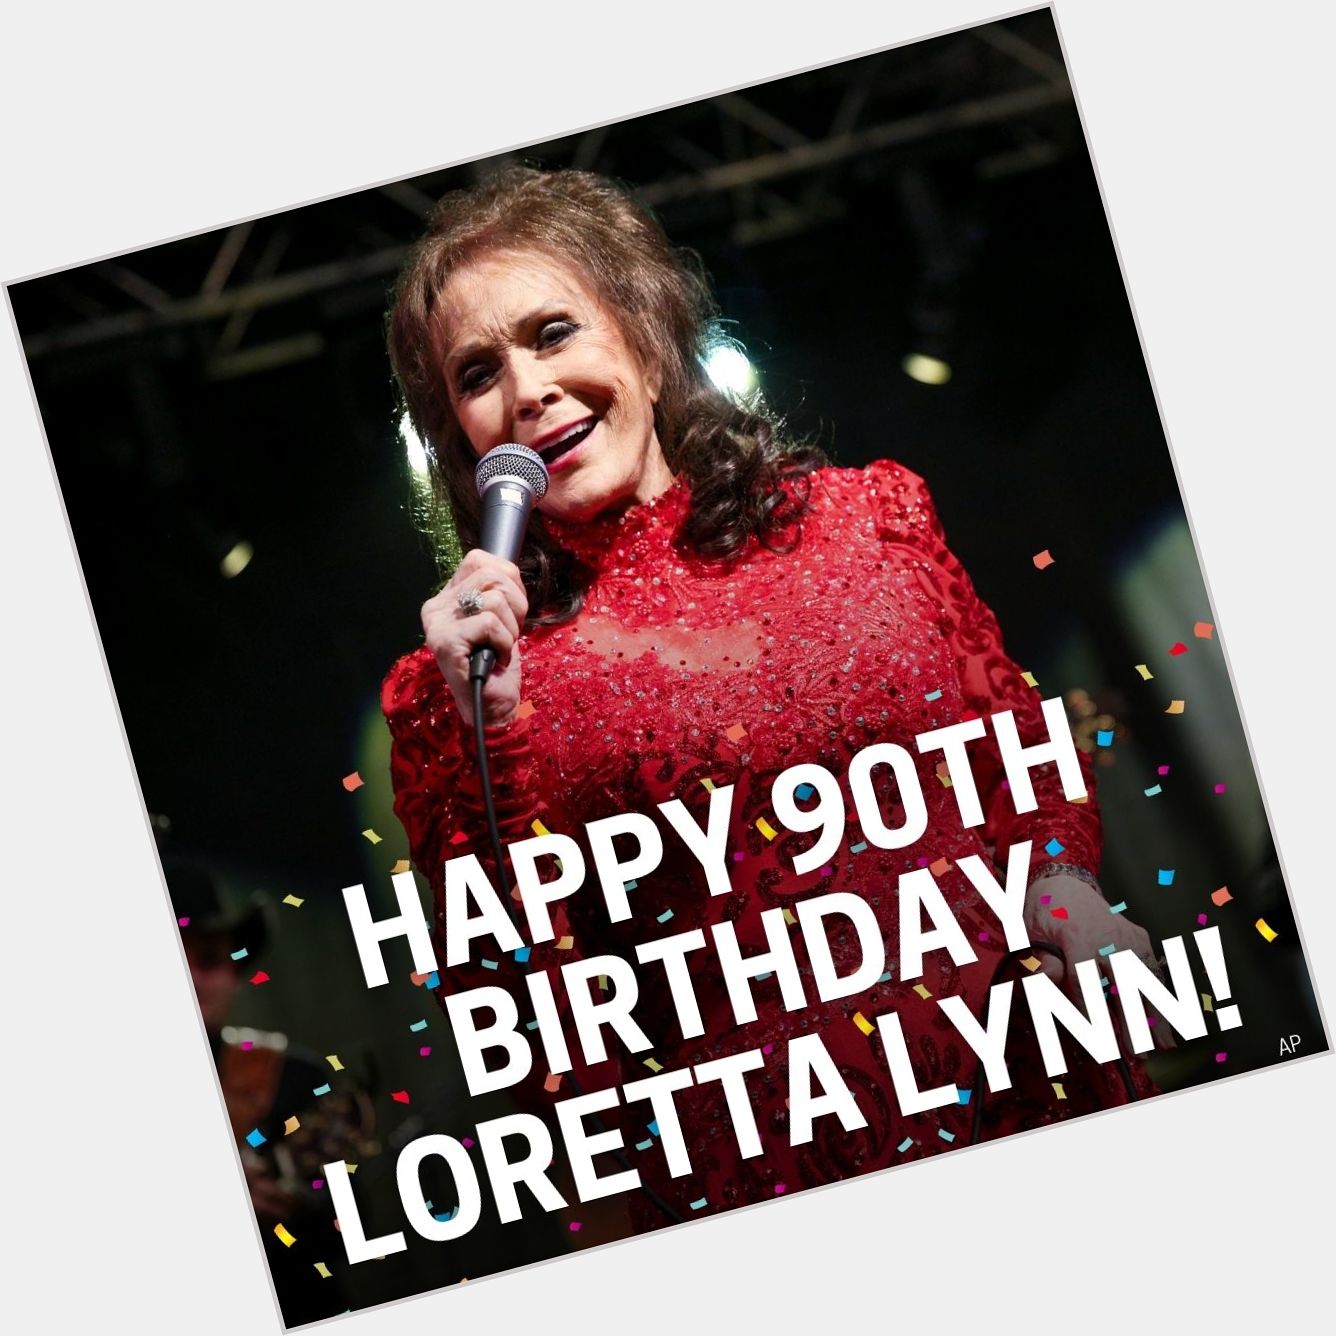 The coal miner\s daughter is turning 90 today! 

Happy birthday to the one and only Loretta Lynn. 